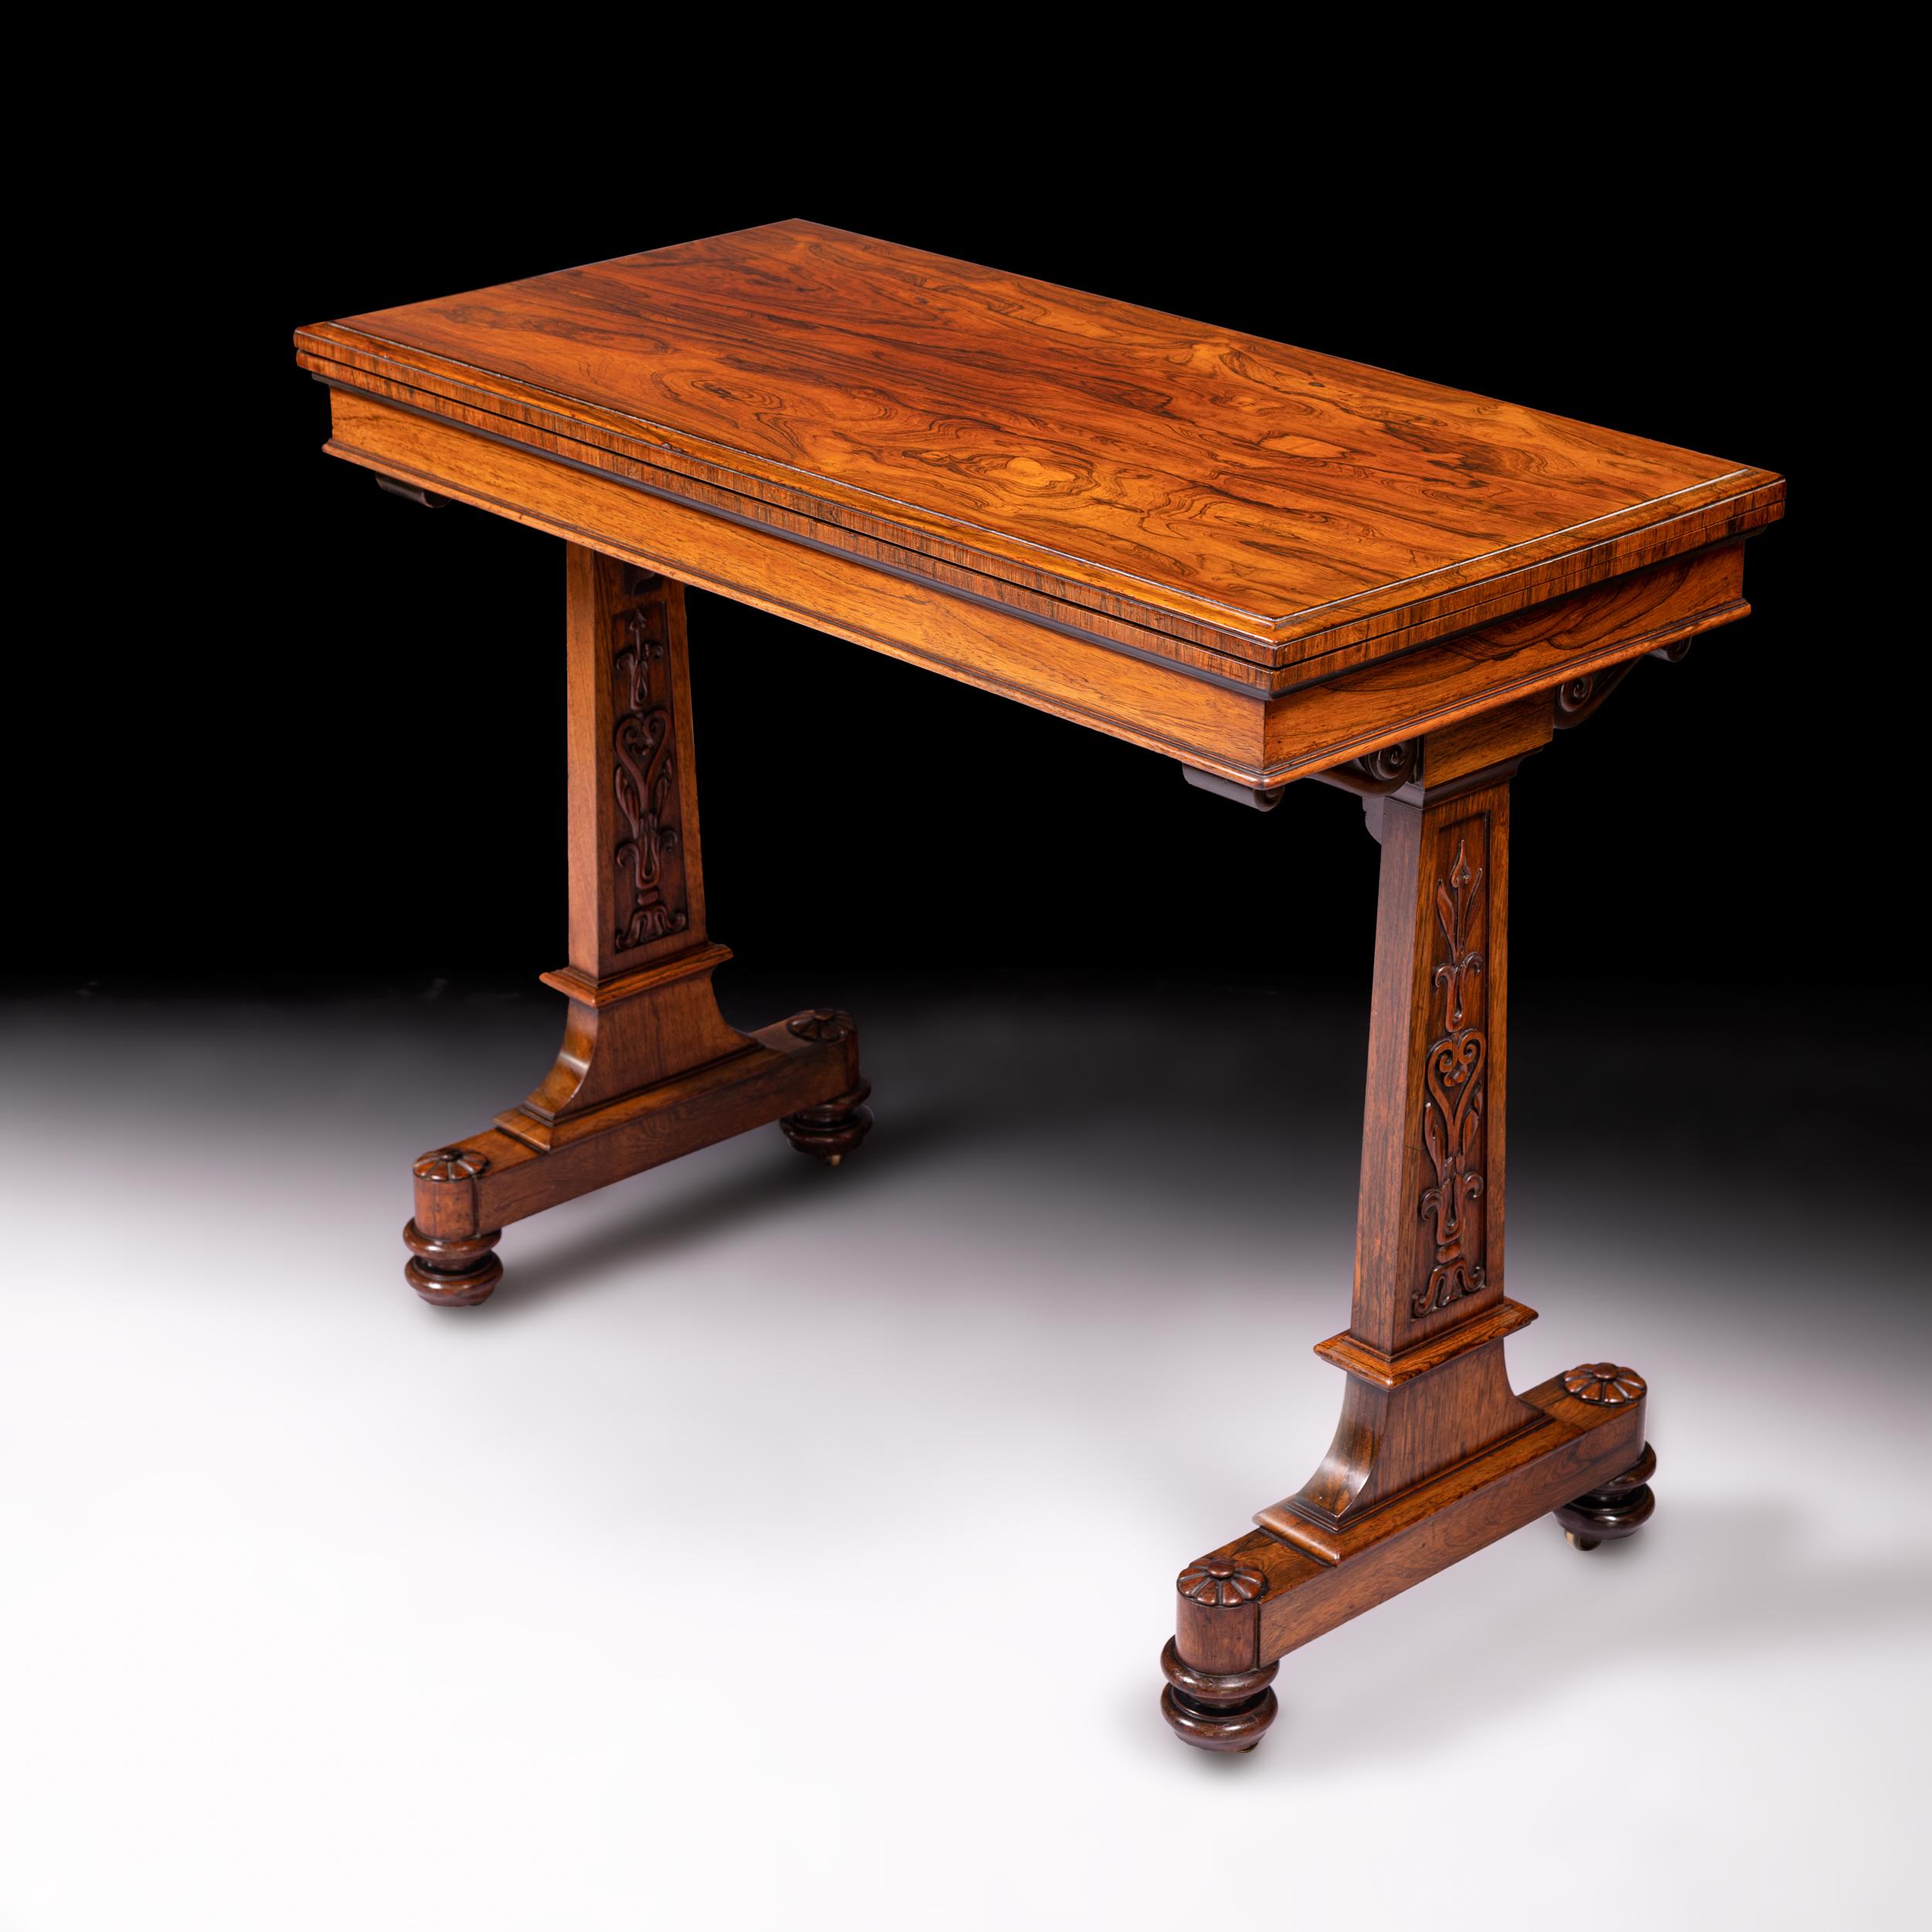 A fine quality William IV rosewood card table stamped T & G Seddon with moulded edge and swivel top, silhouette end supports and raised on turned legs with castors. The legs pull in towards the centre of the table when the table is open, allowing